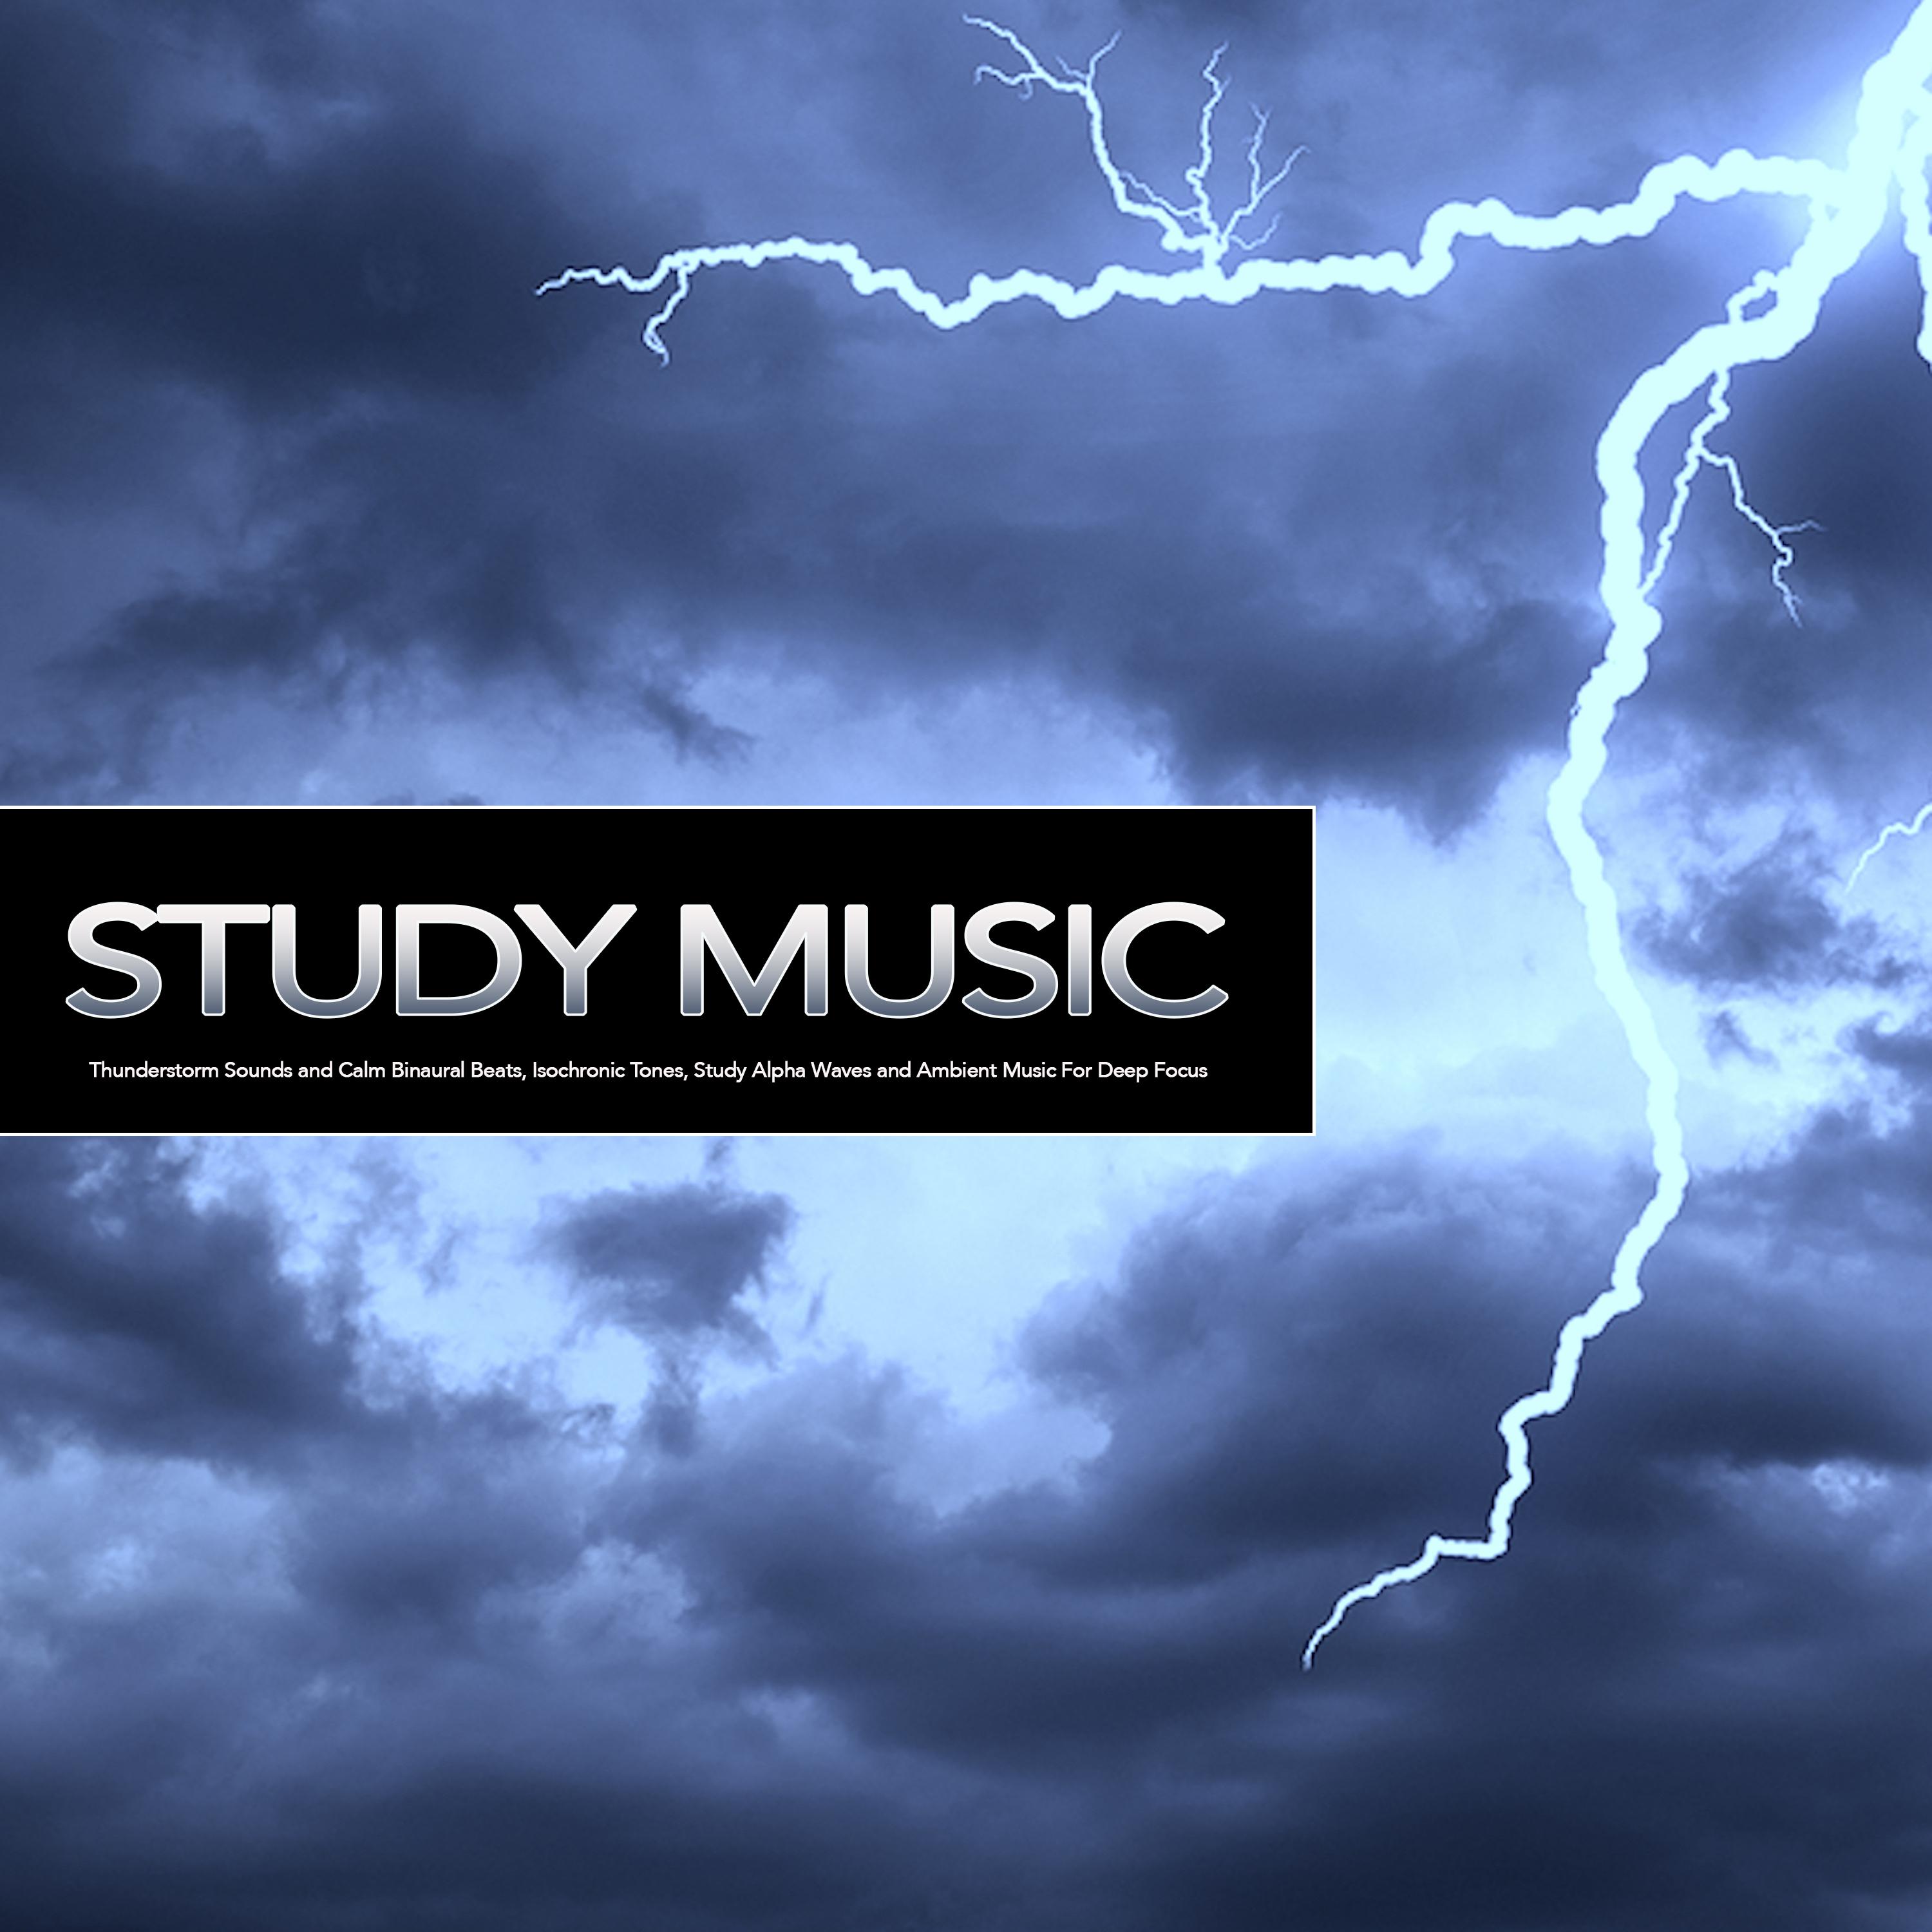 Sounds of a Thunderstorm and Study Music